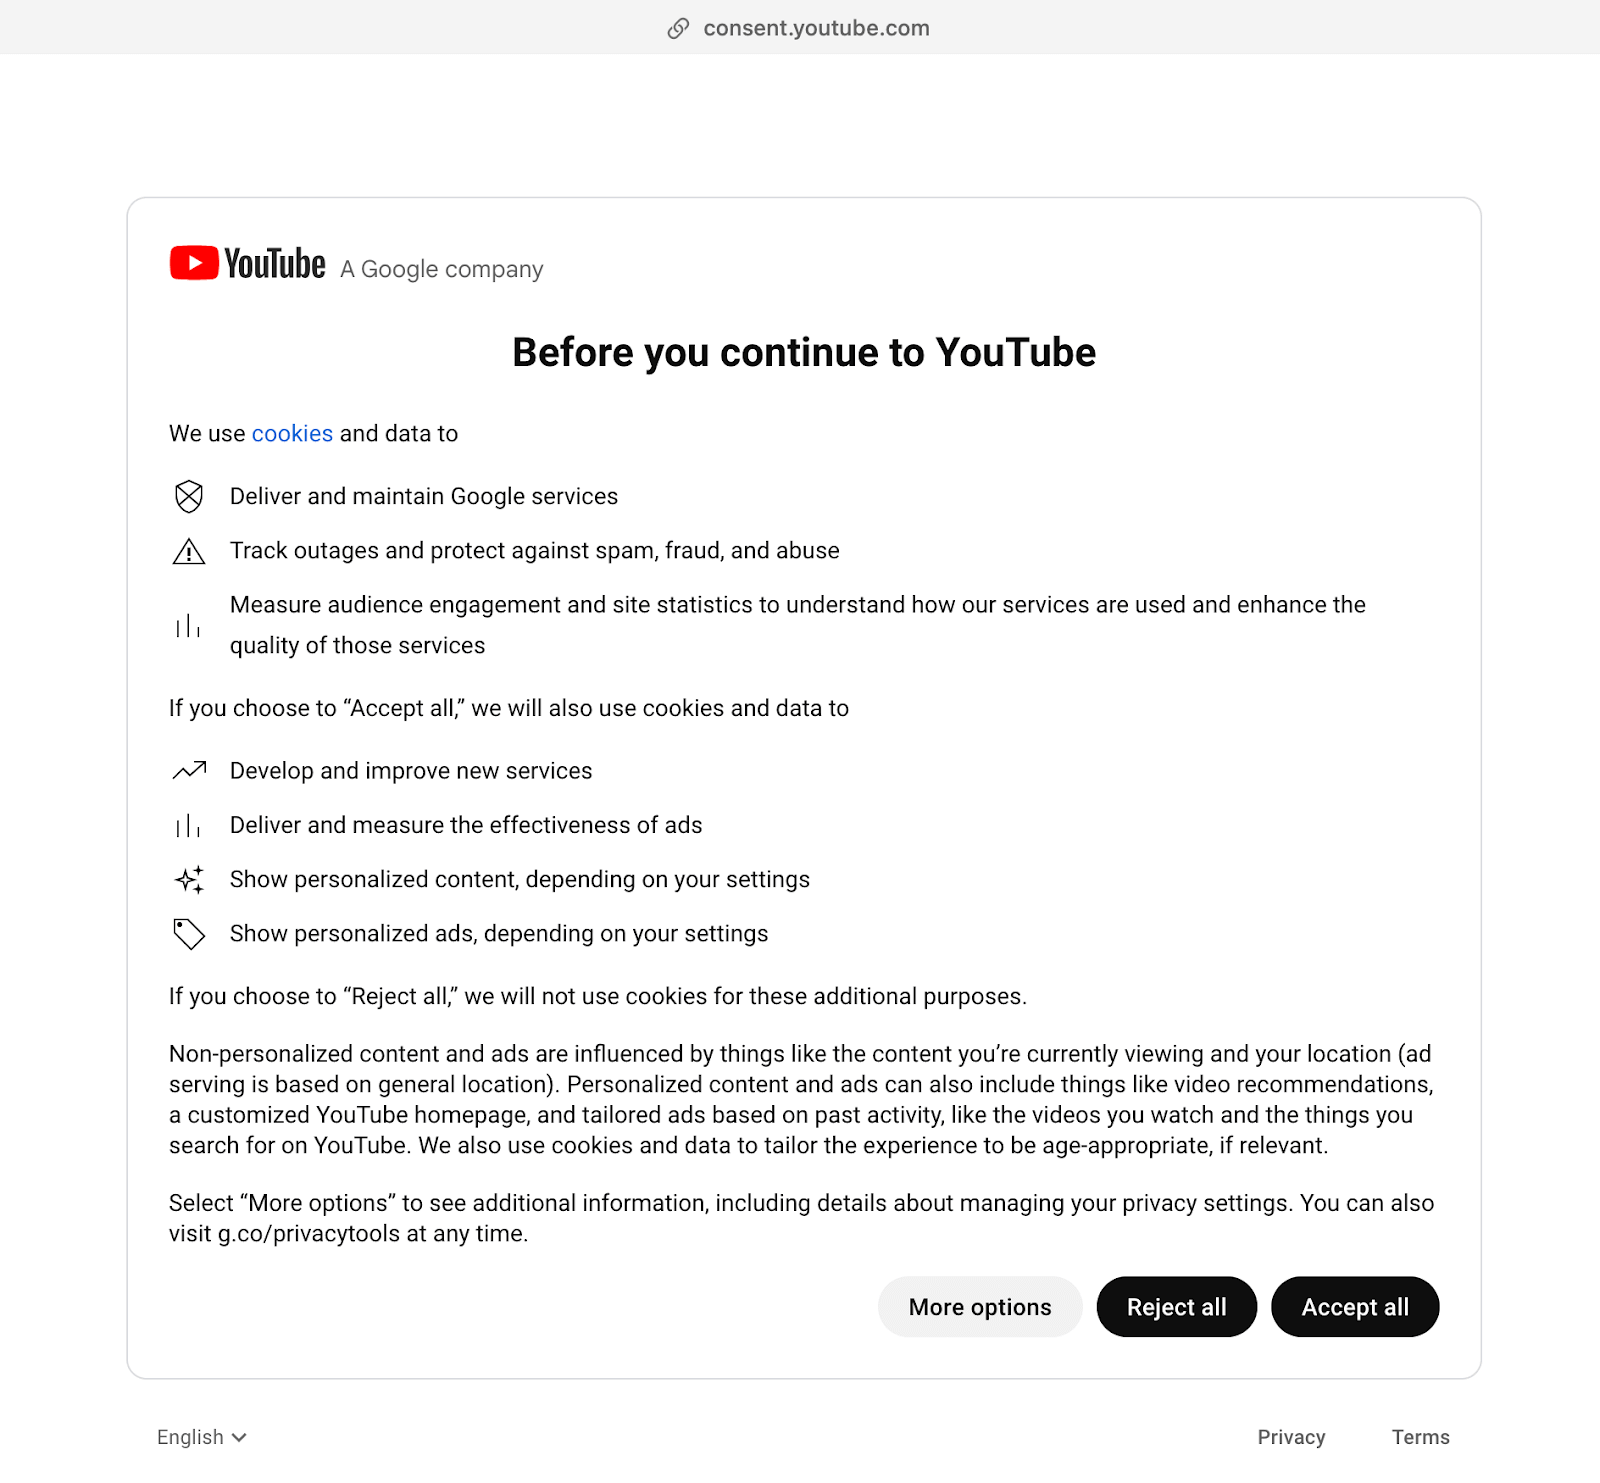 All button is initiated in case the YouTube consent